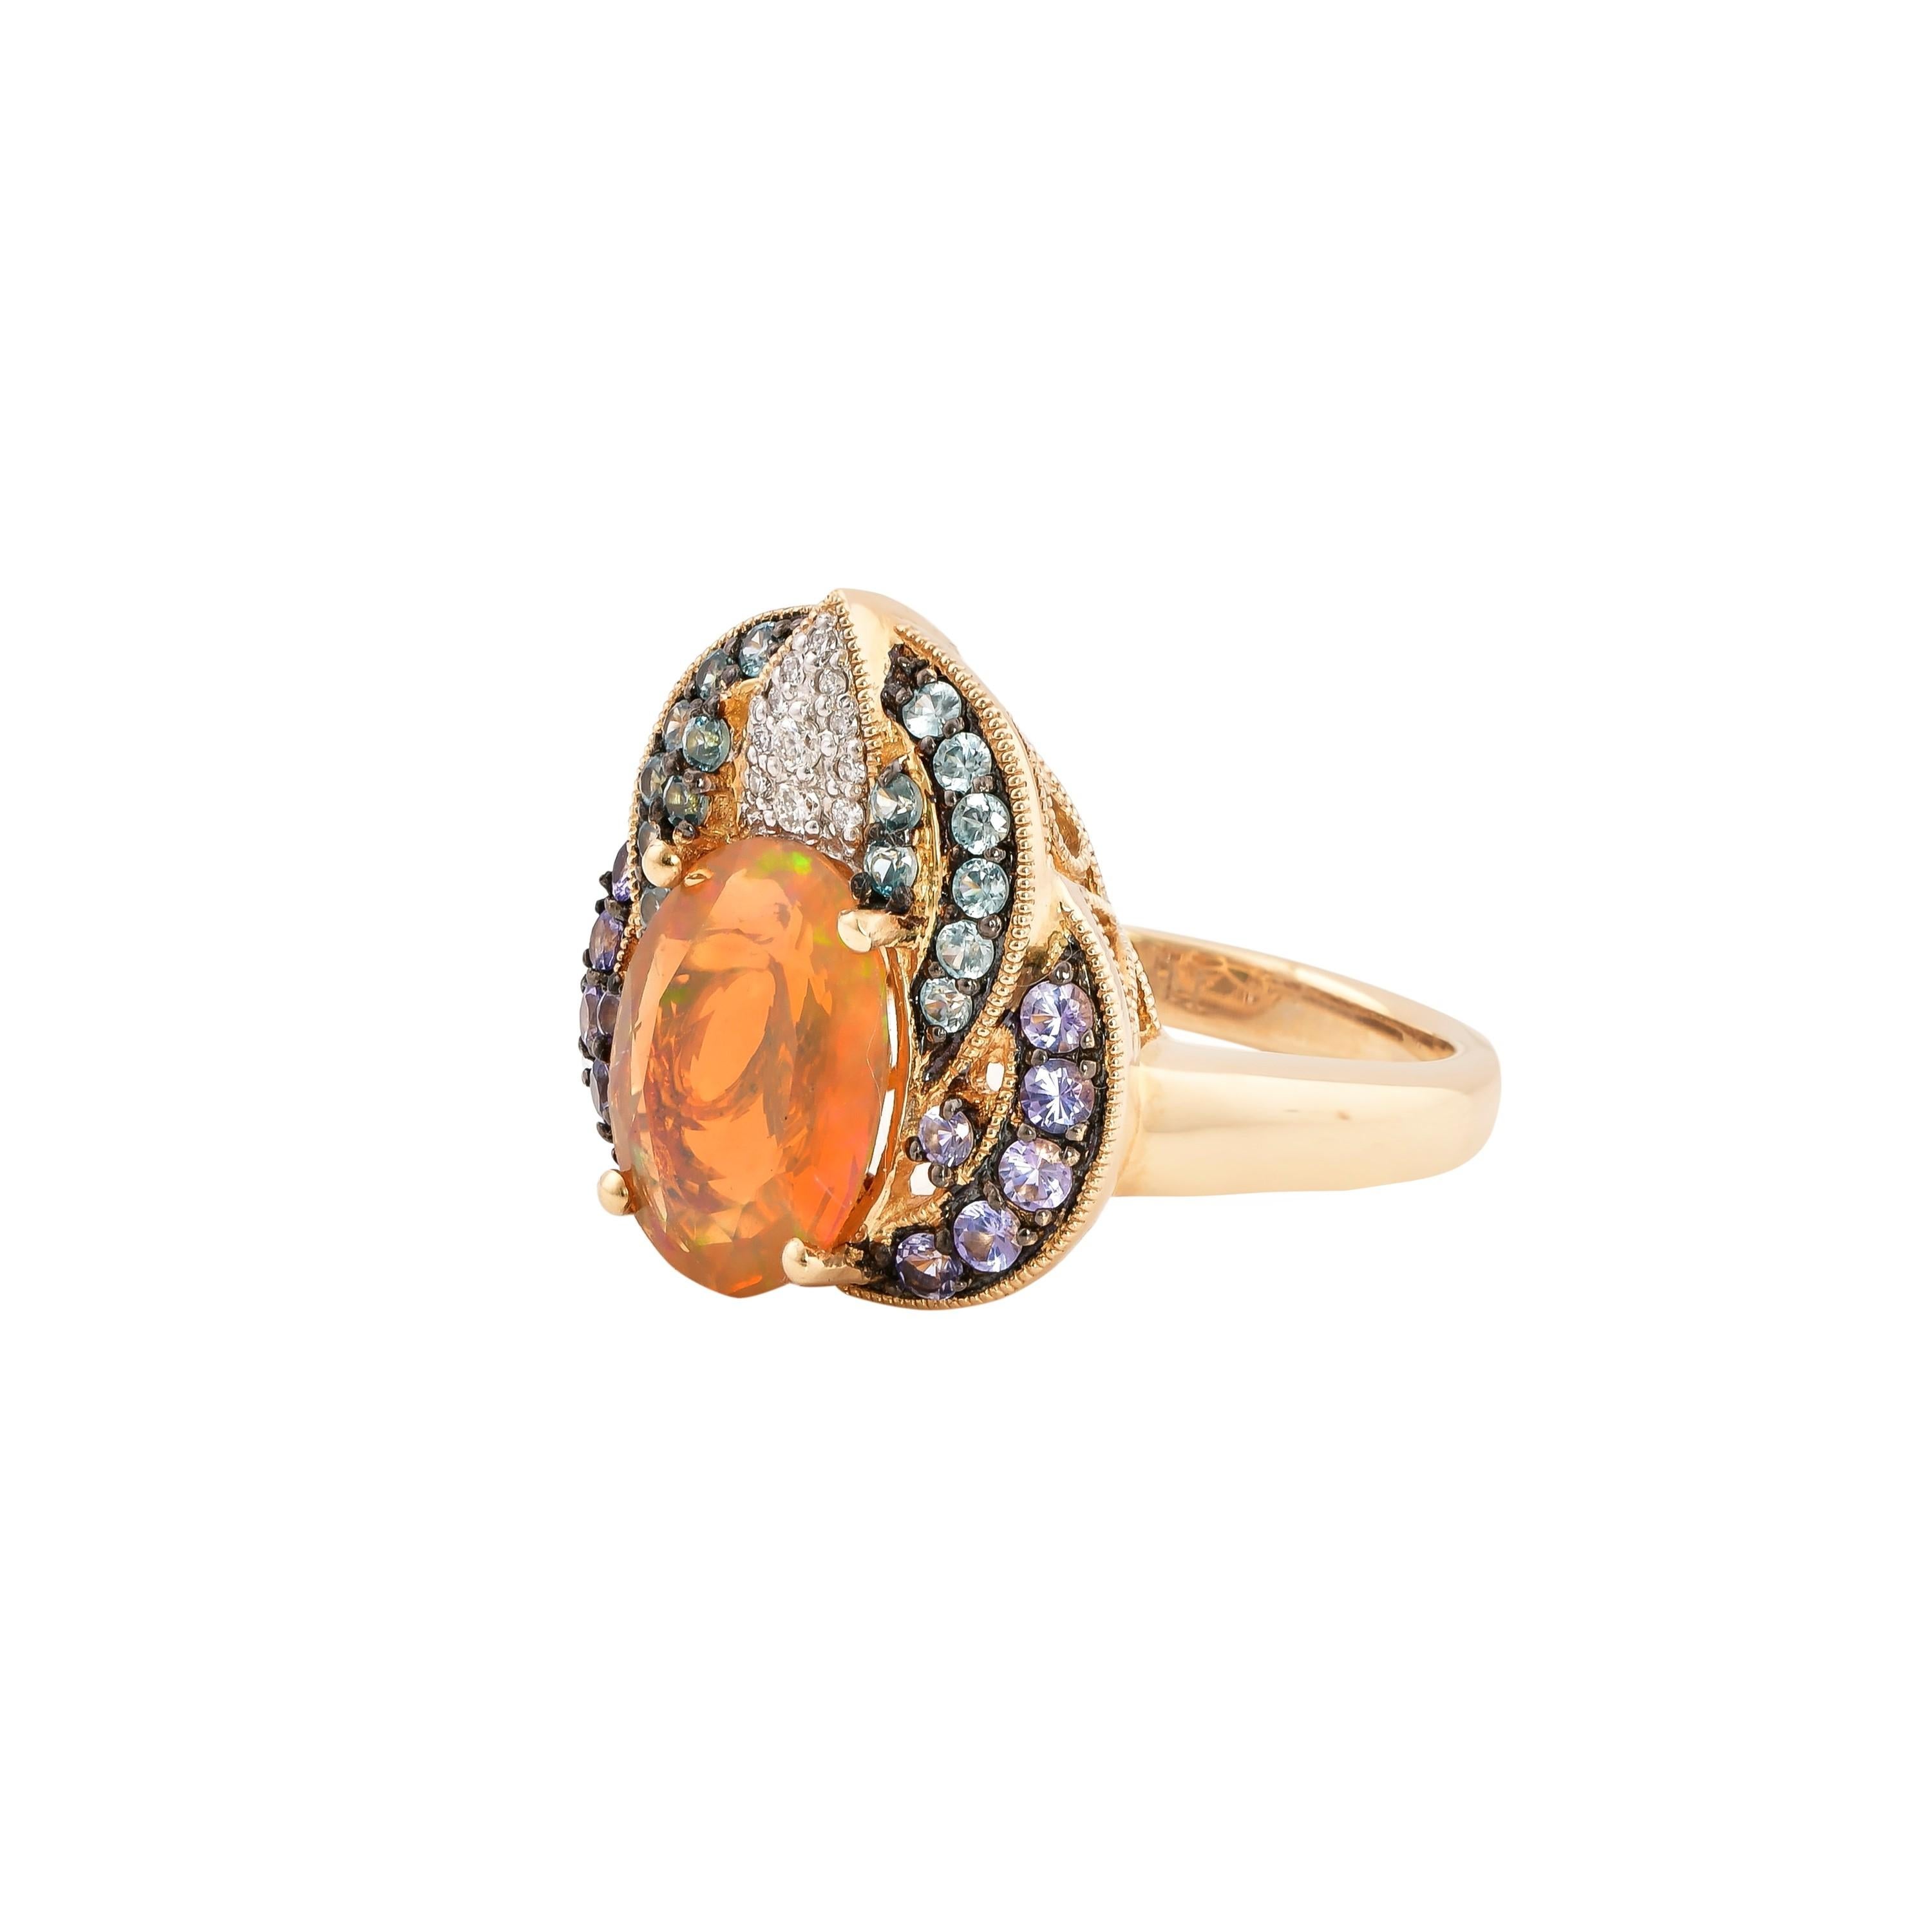 Contemporary 2.02 Carat Ethiopian Opal Ring in 14 Karat Yellow Gold with Diamonds For Sale